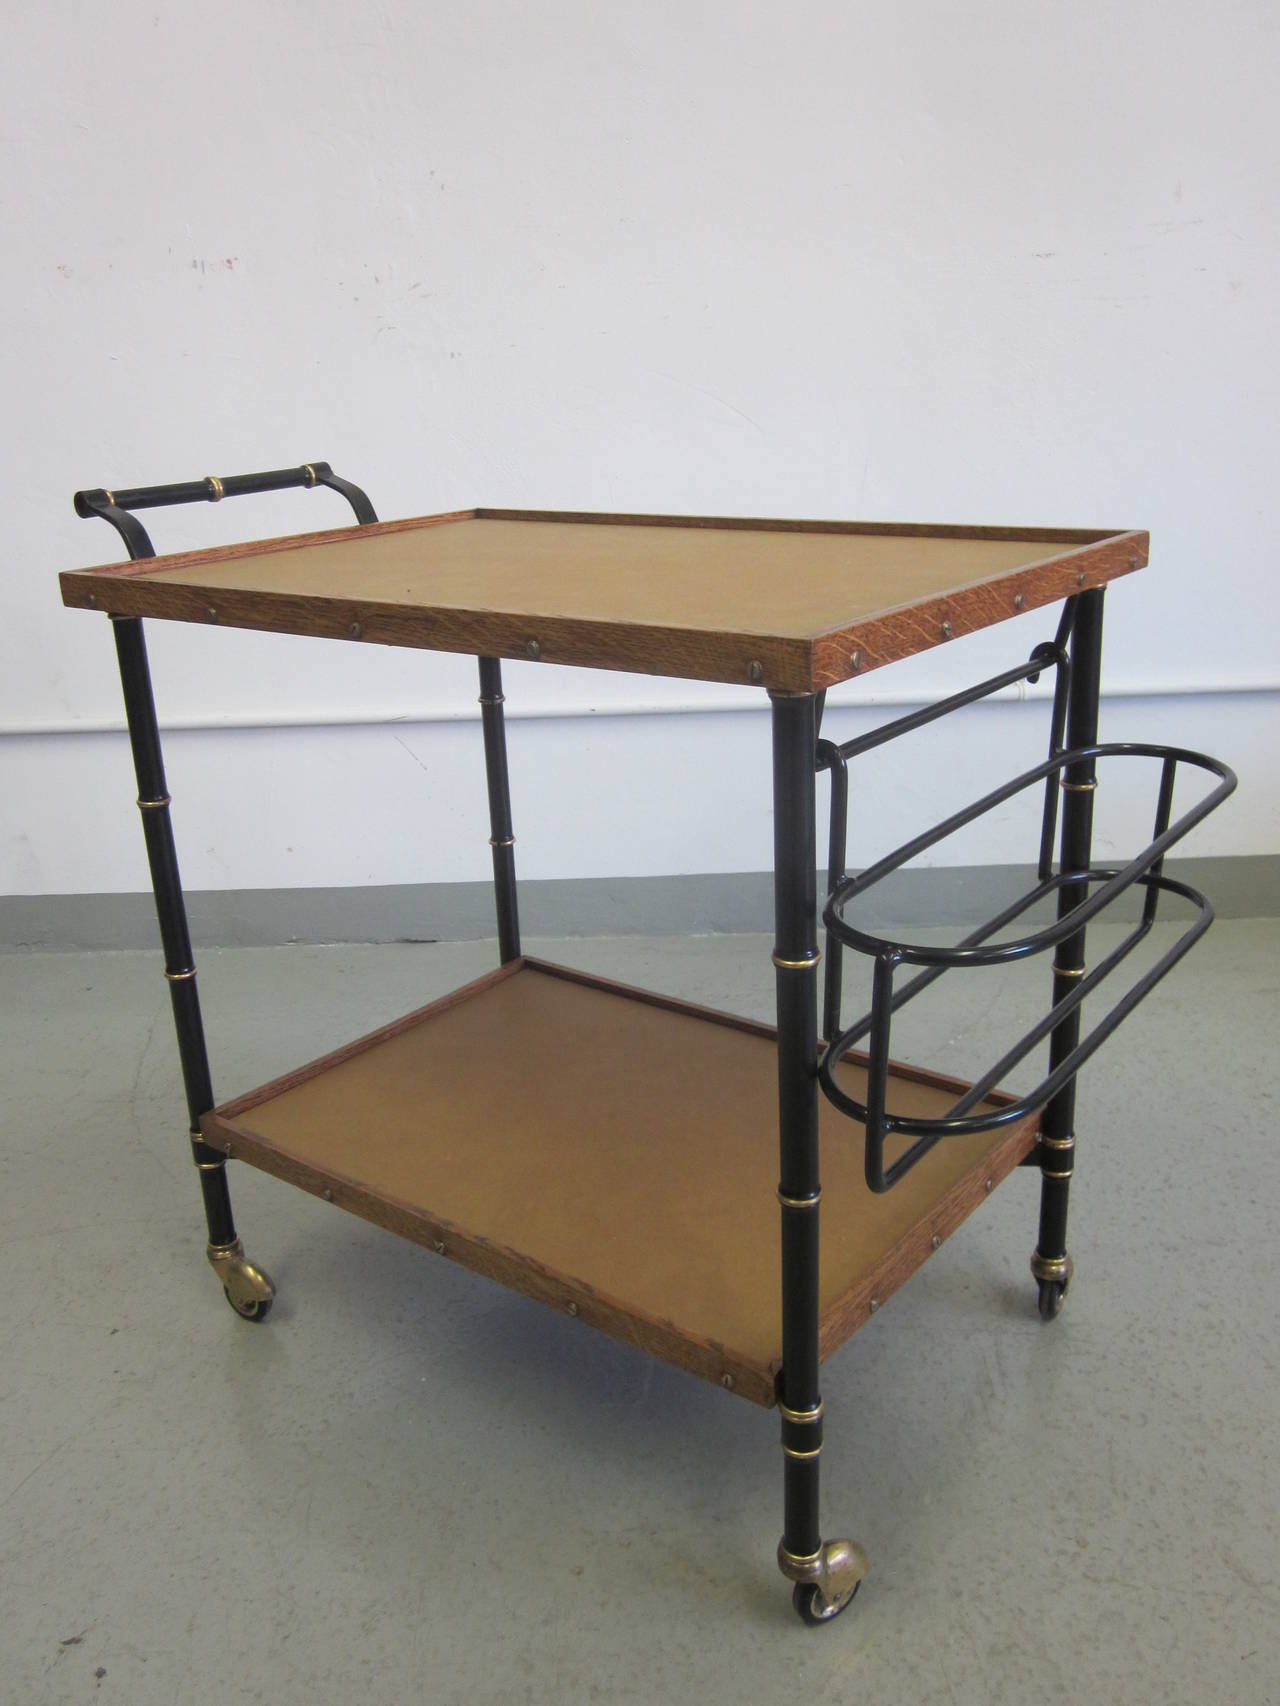 Important French Mid-Century bar cart by French master designer, Jacques Adnet (France, 1901-1984) showing influences of modern and neoclassical design. 

The cart is double level with a detachable enameled steel bottle rack and composed of